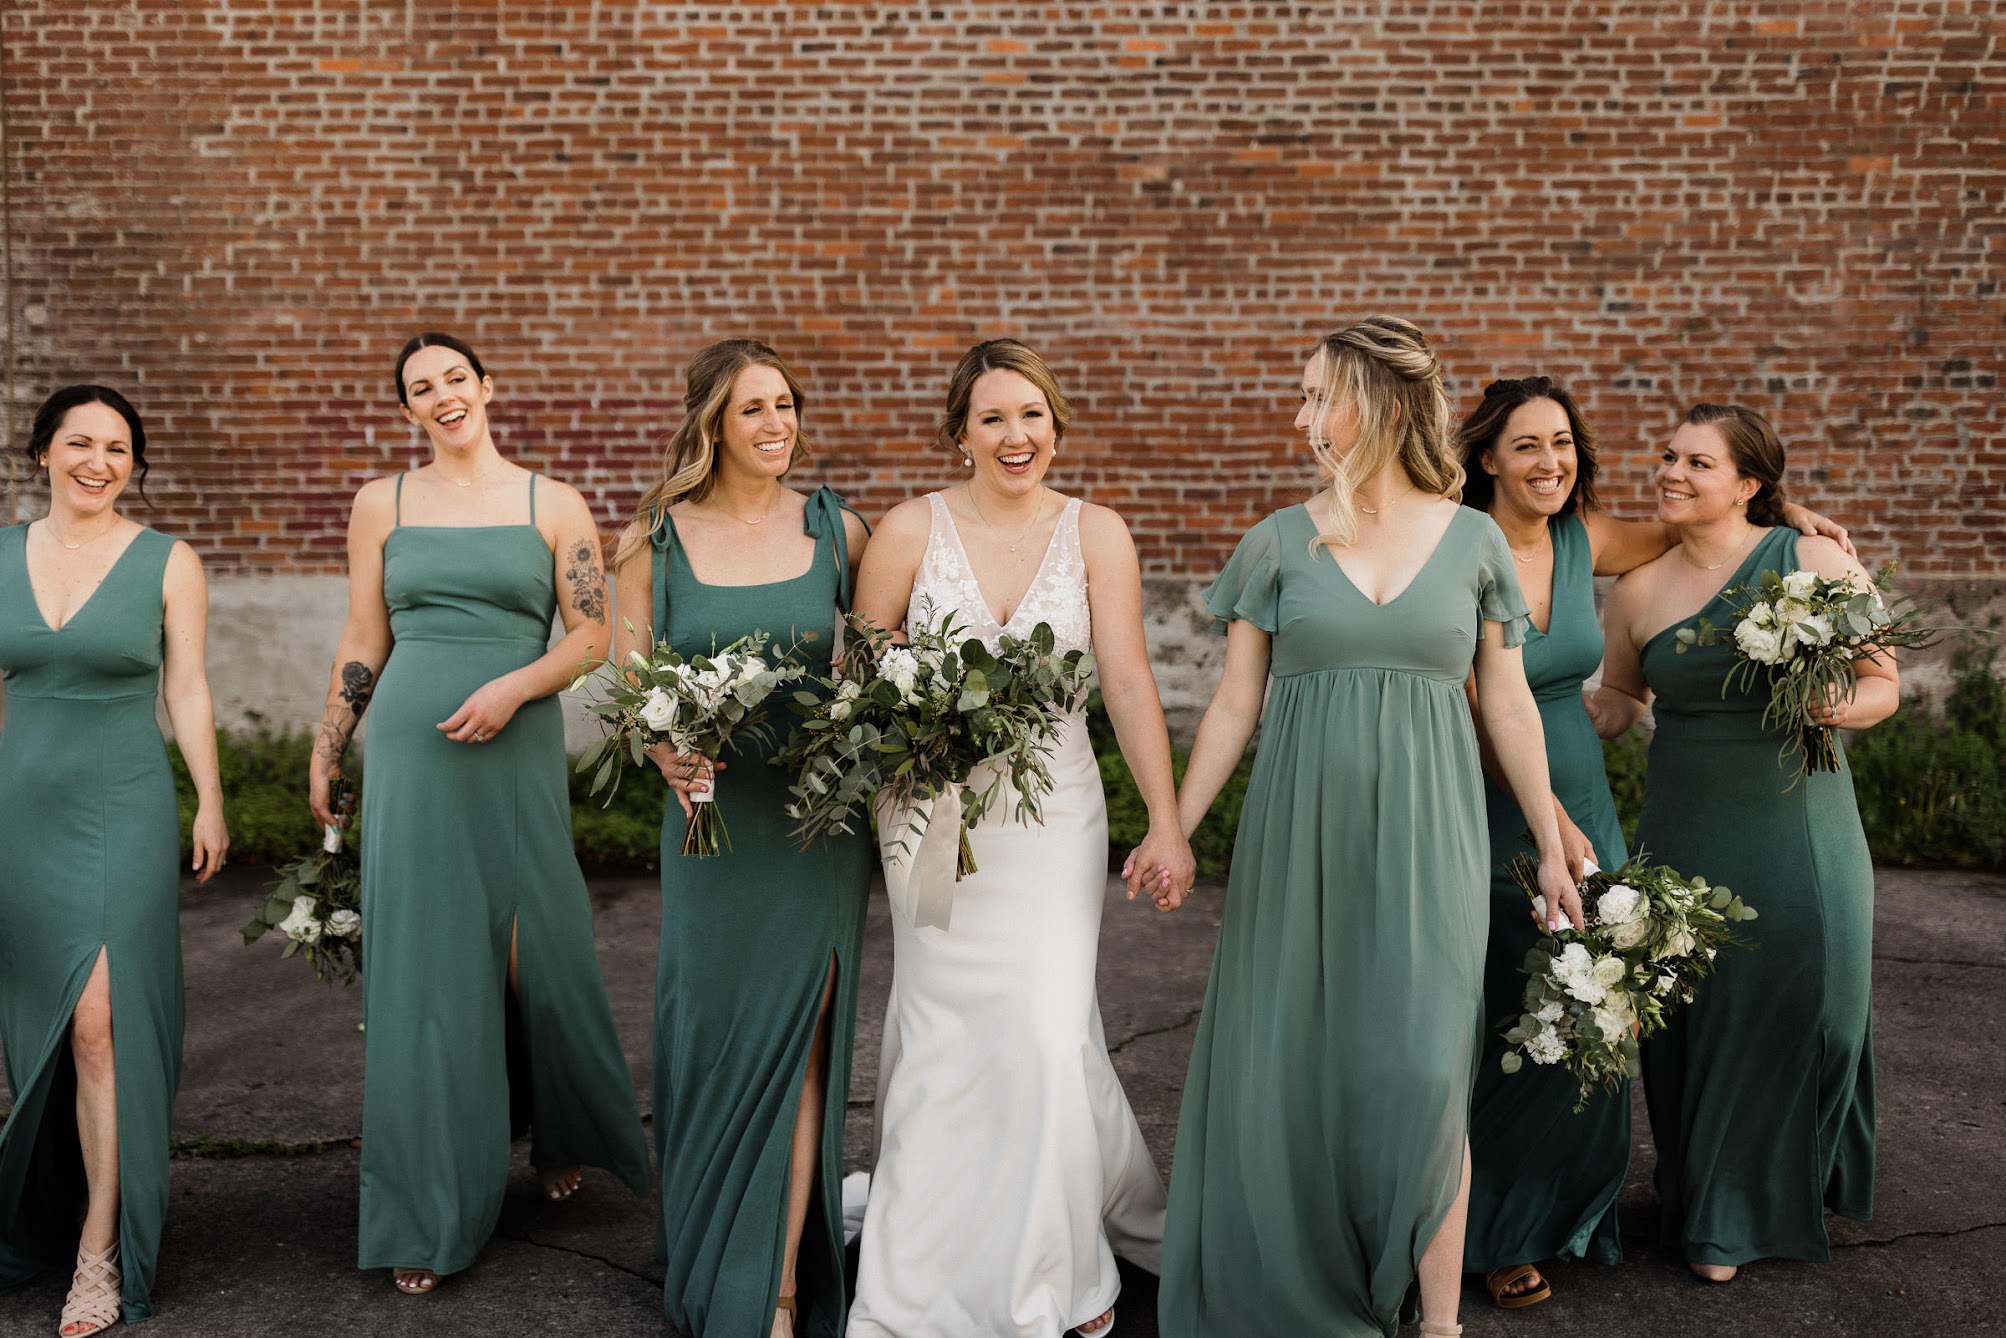 A wedding bride and her bridesmaids walking down the street, holding hands.